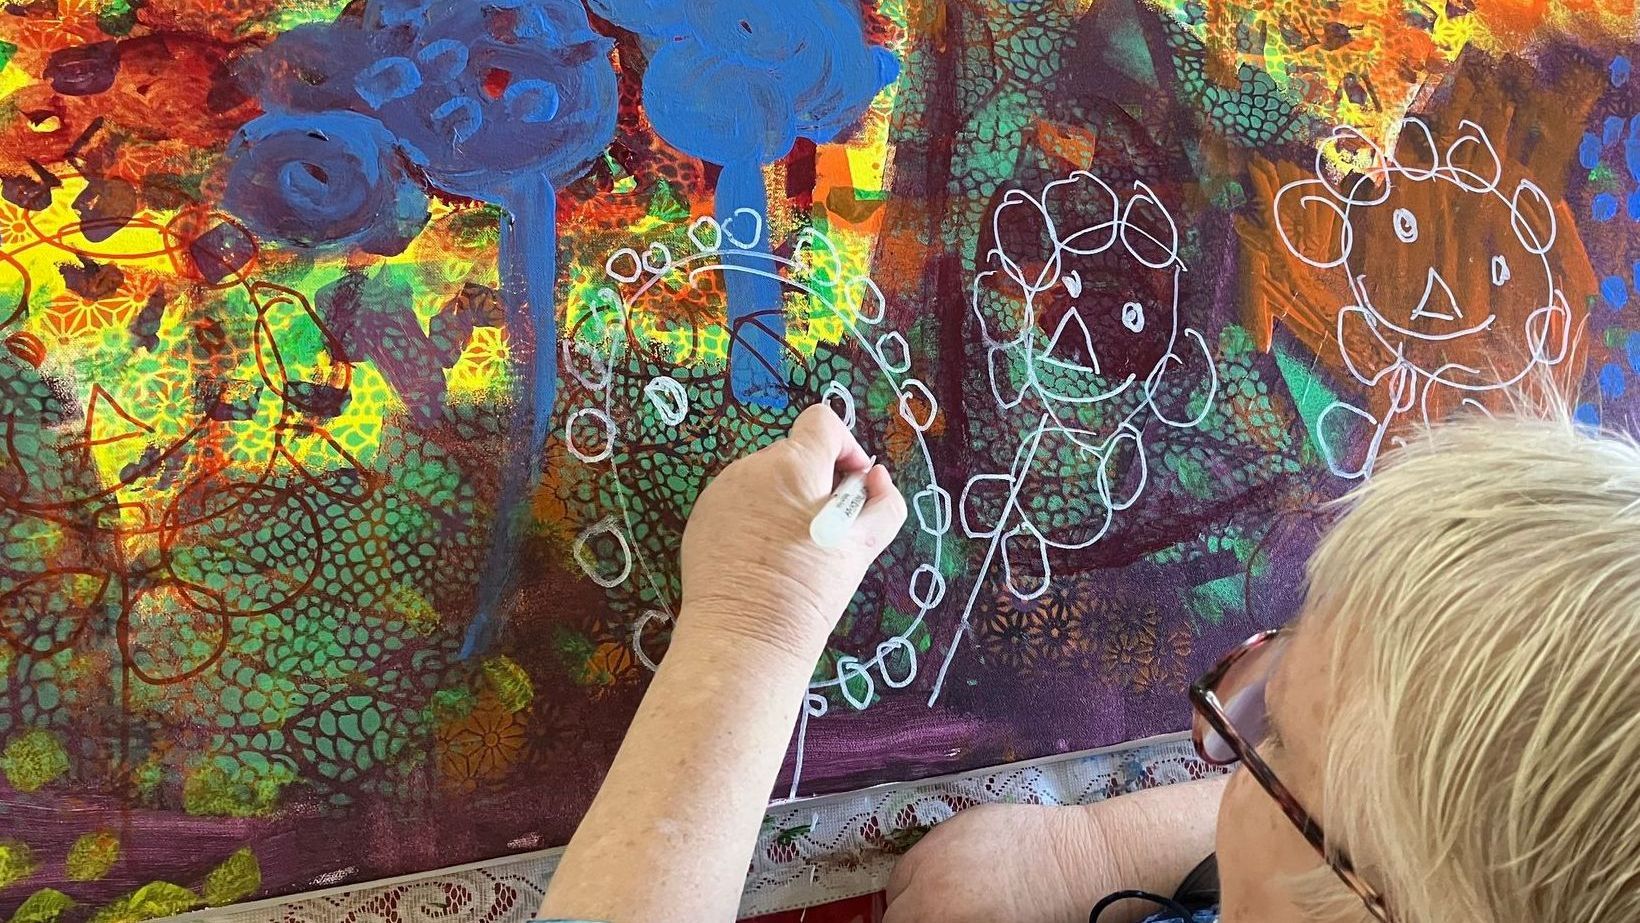 Darlene drawing flowers on painted canvas